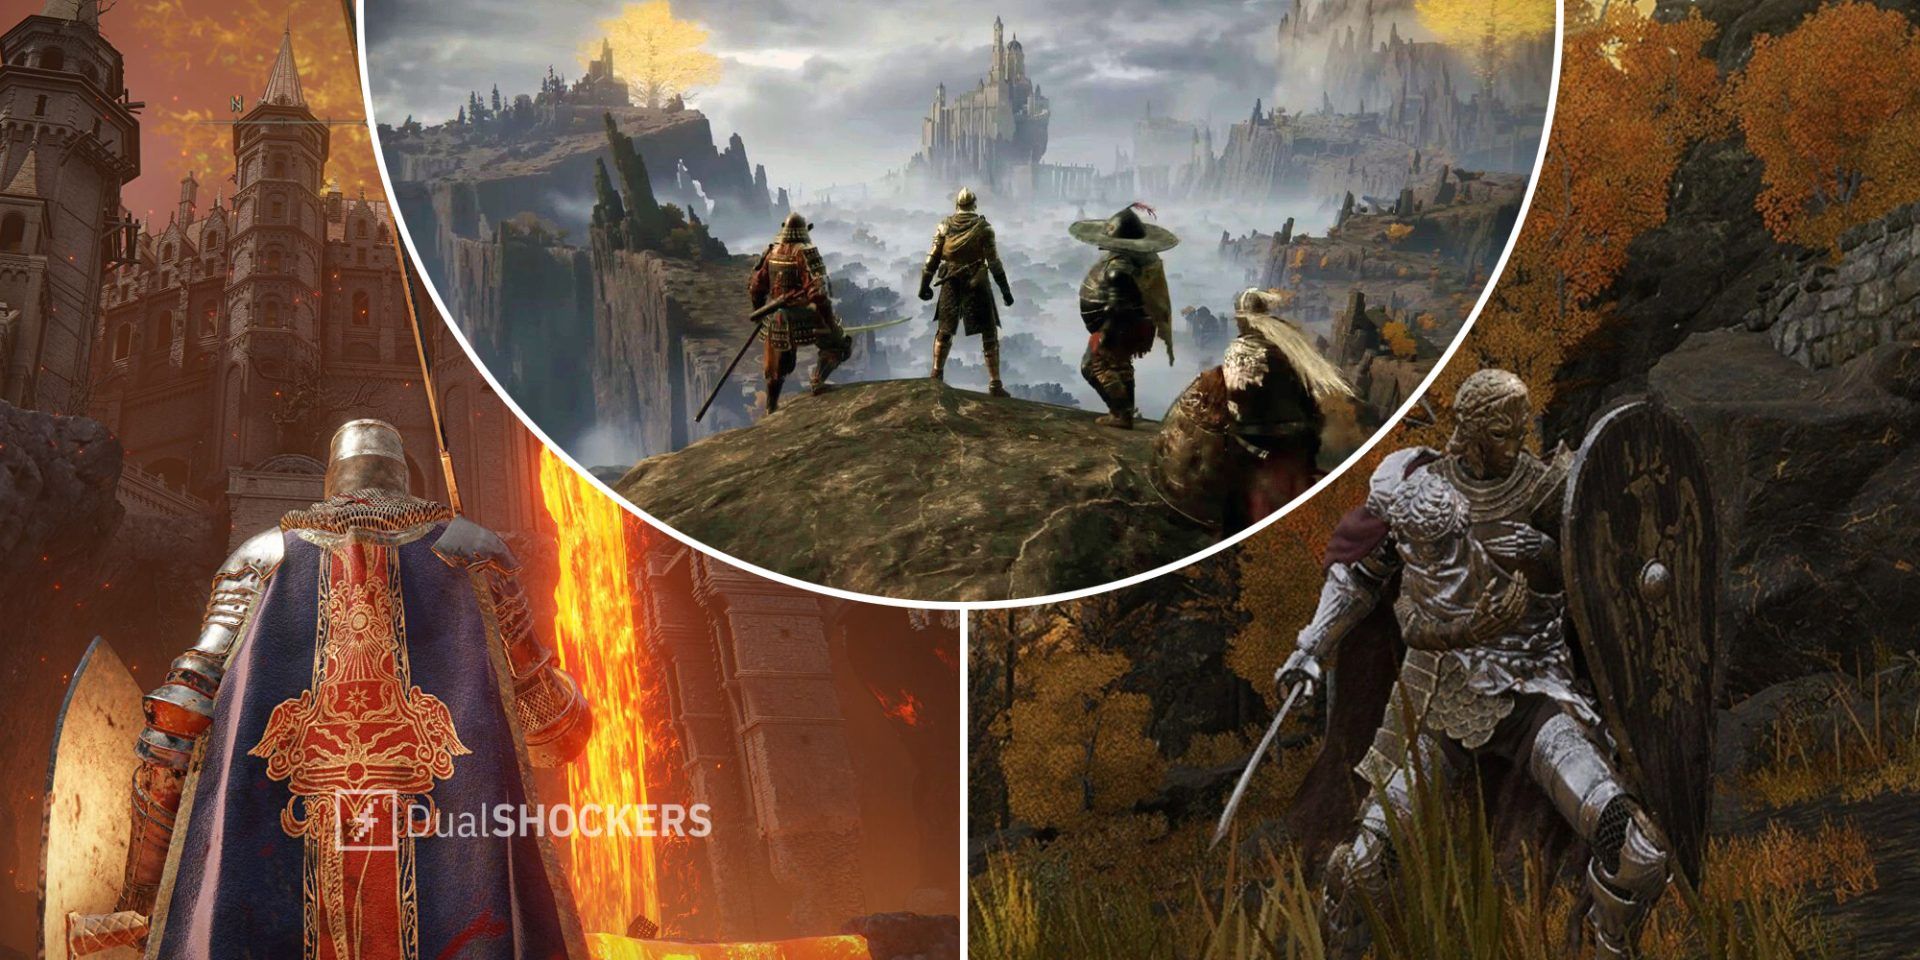 Elden Ring player with cape and armor in front of Volcano Manor on left, Elden Ring players overlooking landscape in middle, Elden Ring player with sword and shield on right